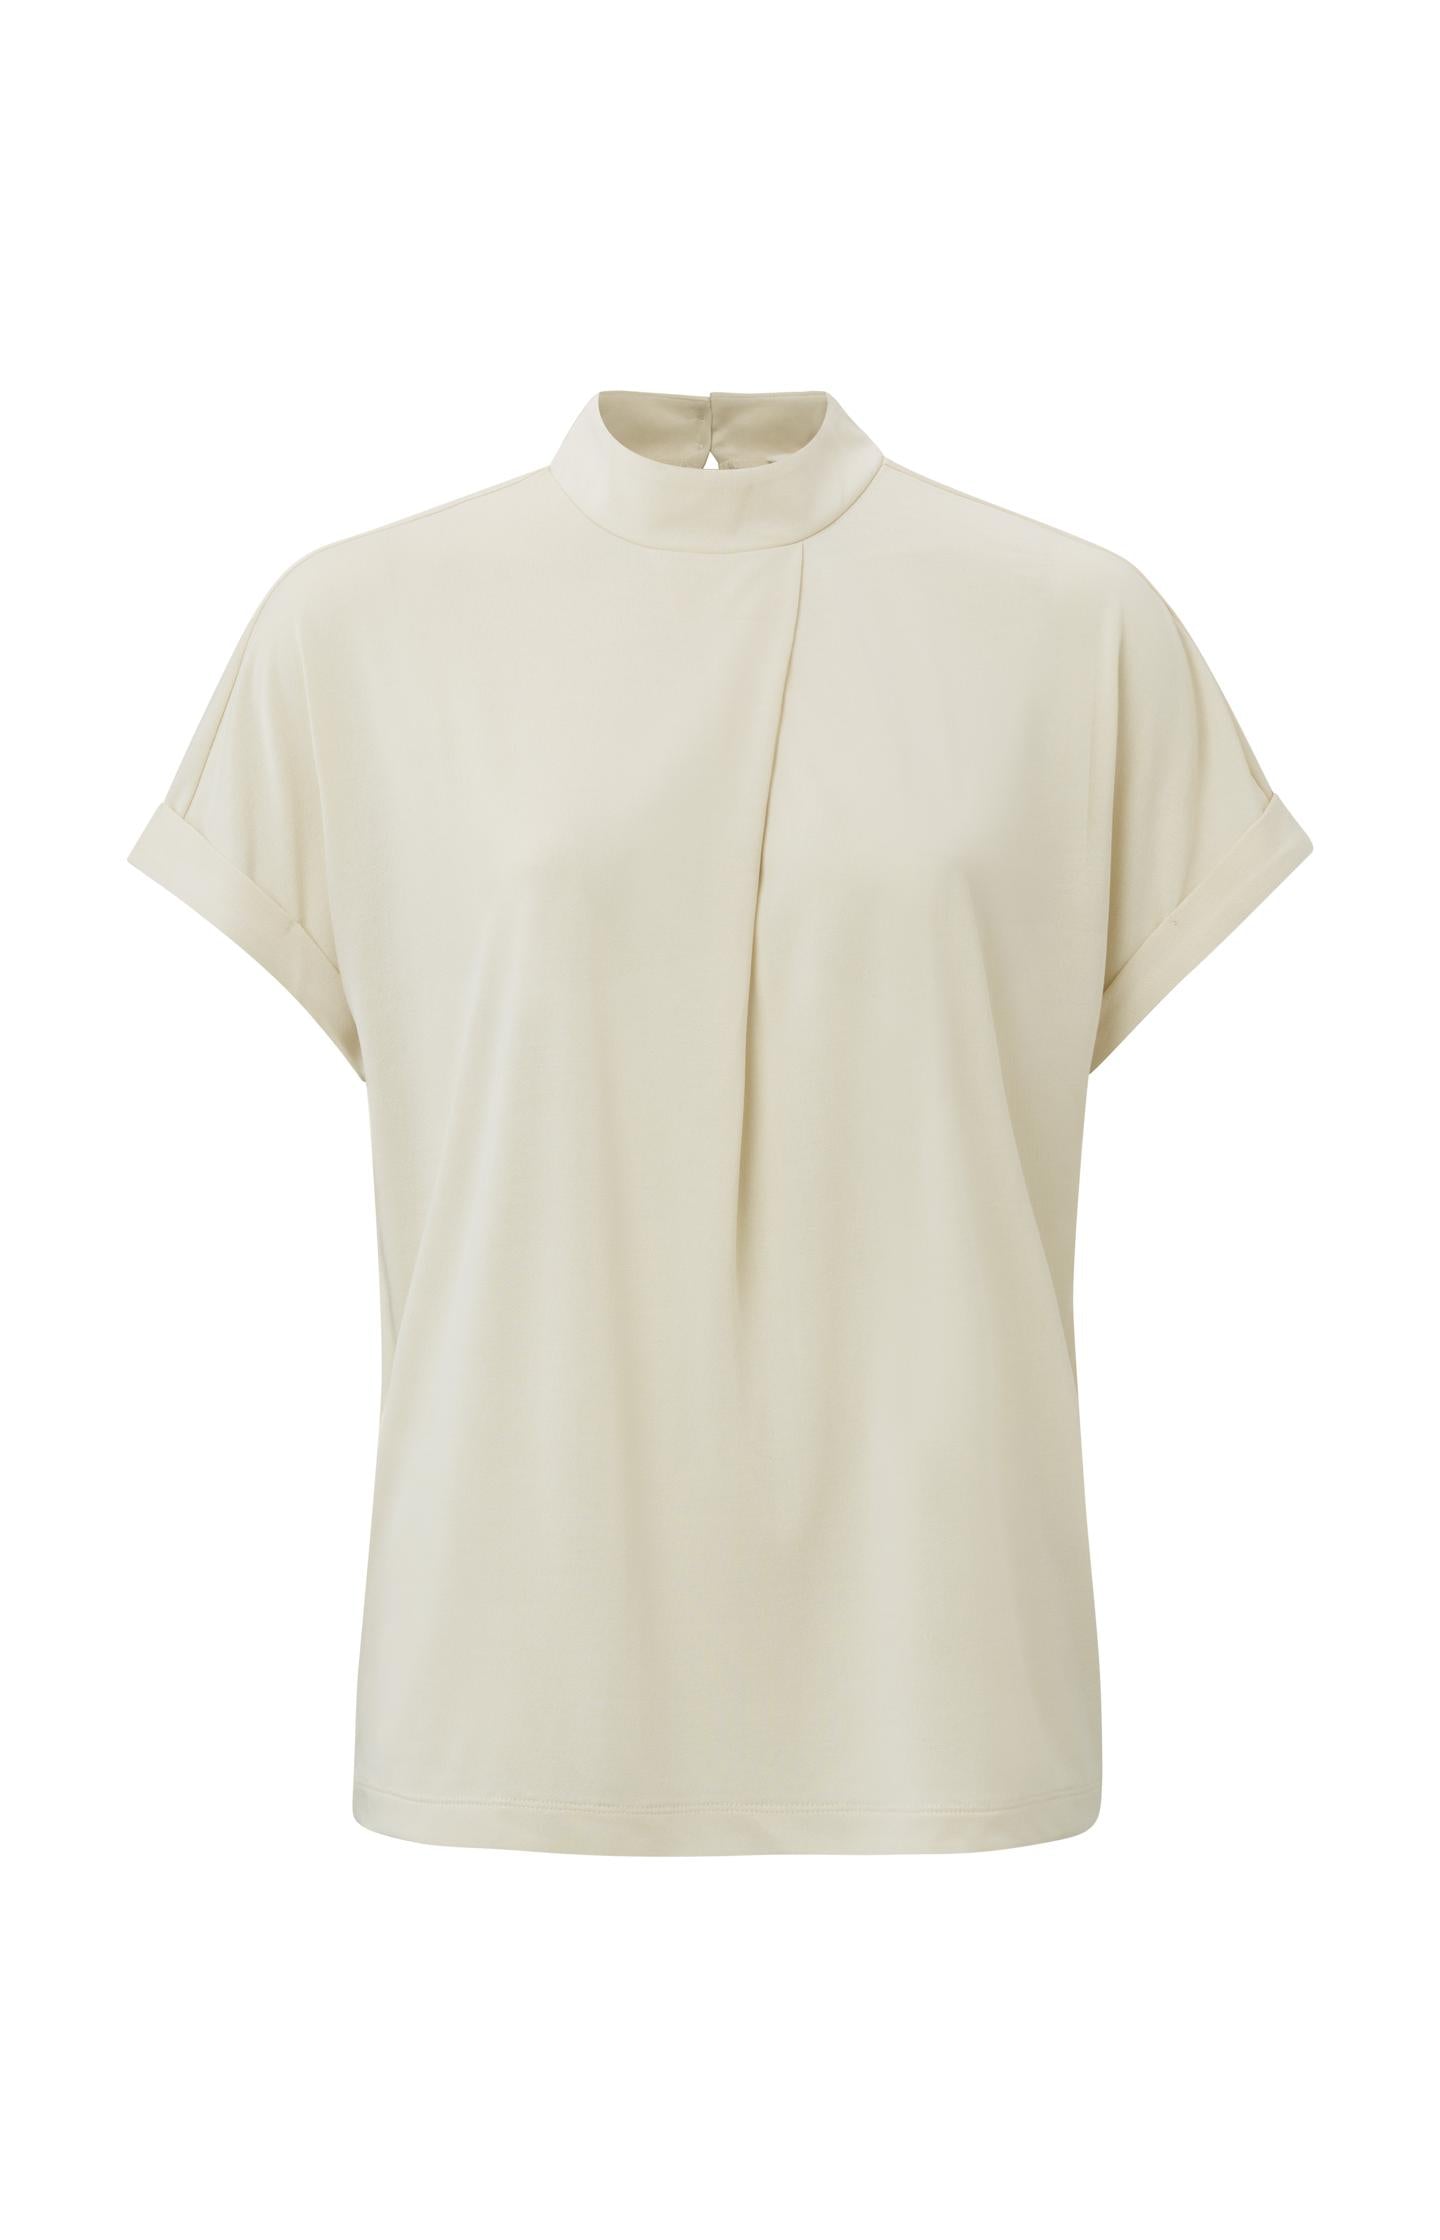 Top with high round neck, short sleeves and pleat detail - Type: product